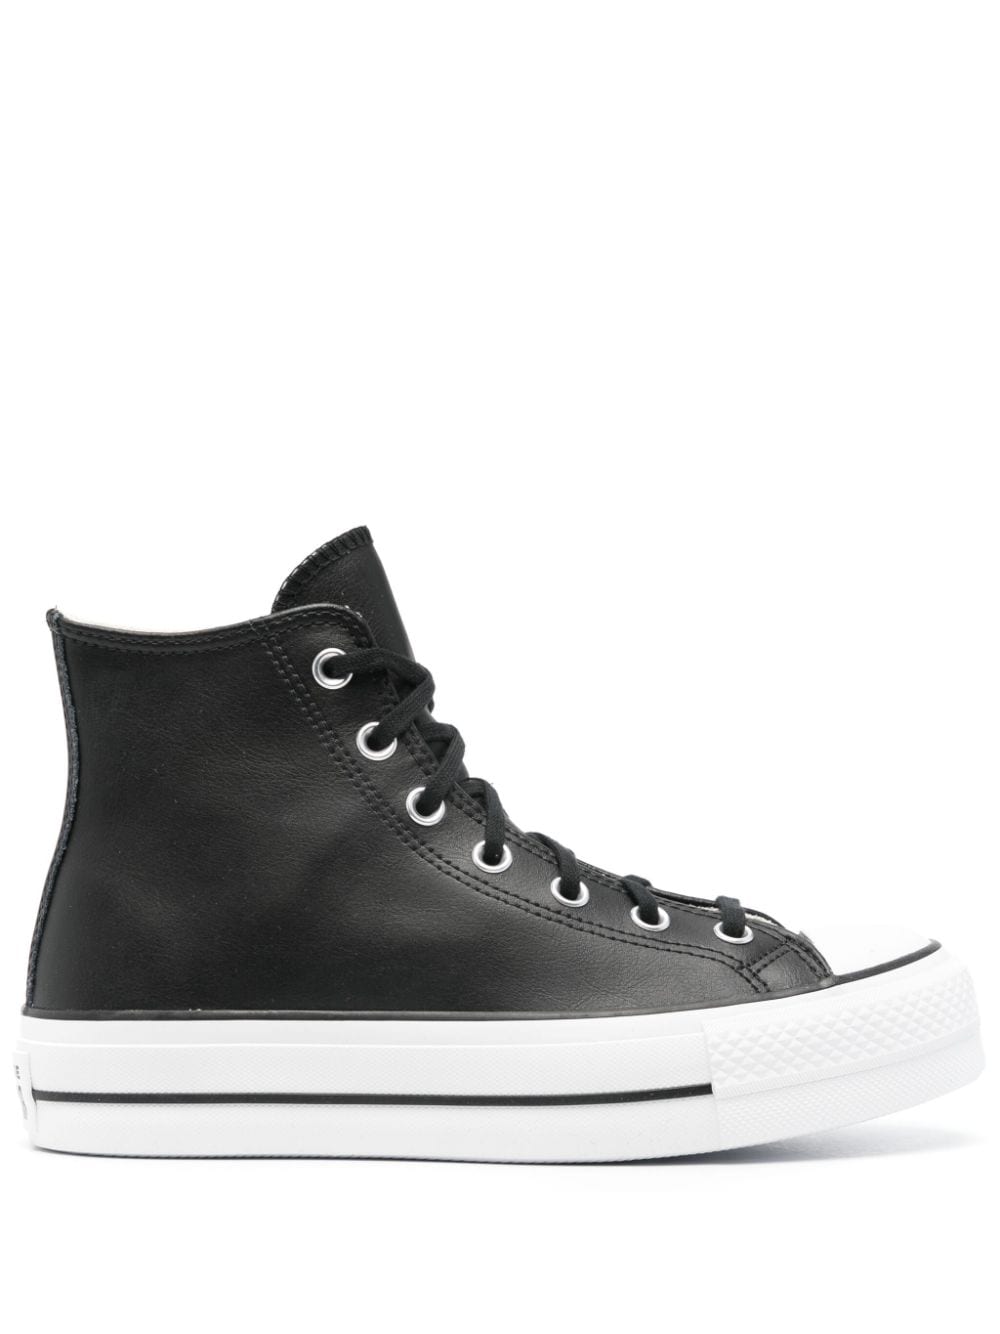 Converse Chuck Taylor Leather Platform Trainers In Black